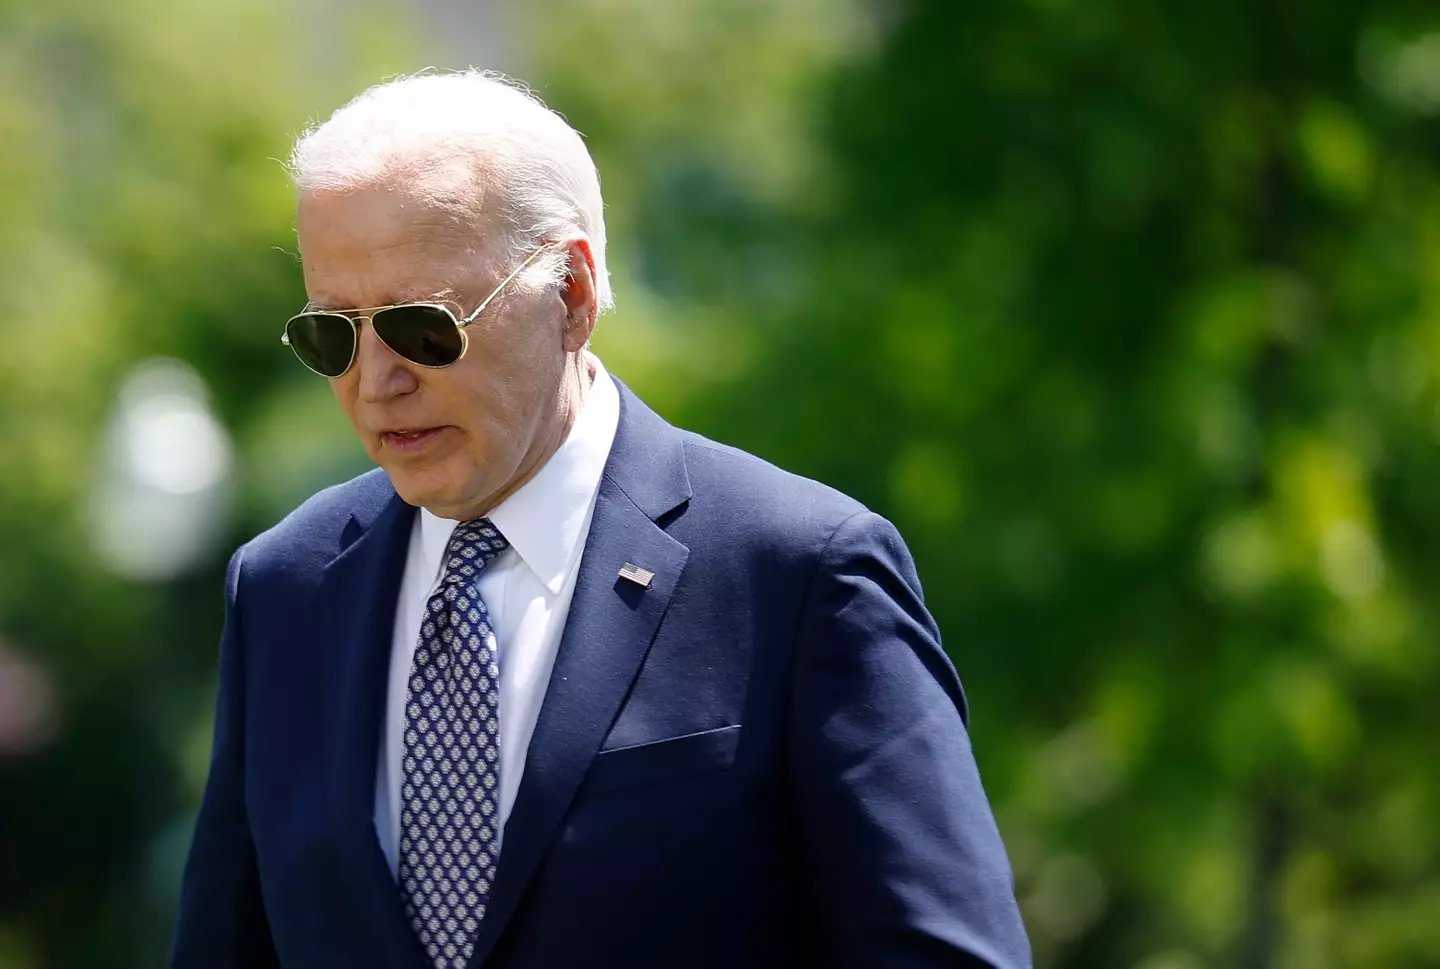 Biden has opened up about how the loss affected him. (Kevin Dietsch/Getty Images)